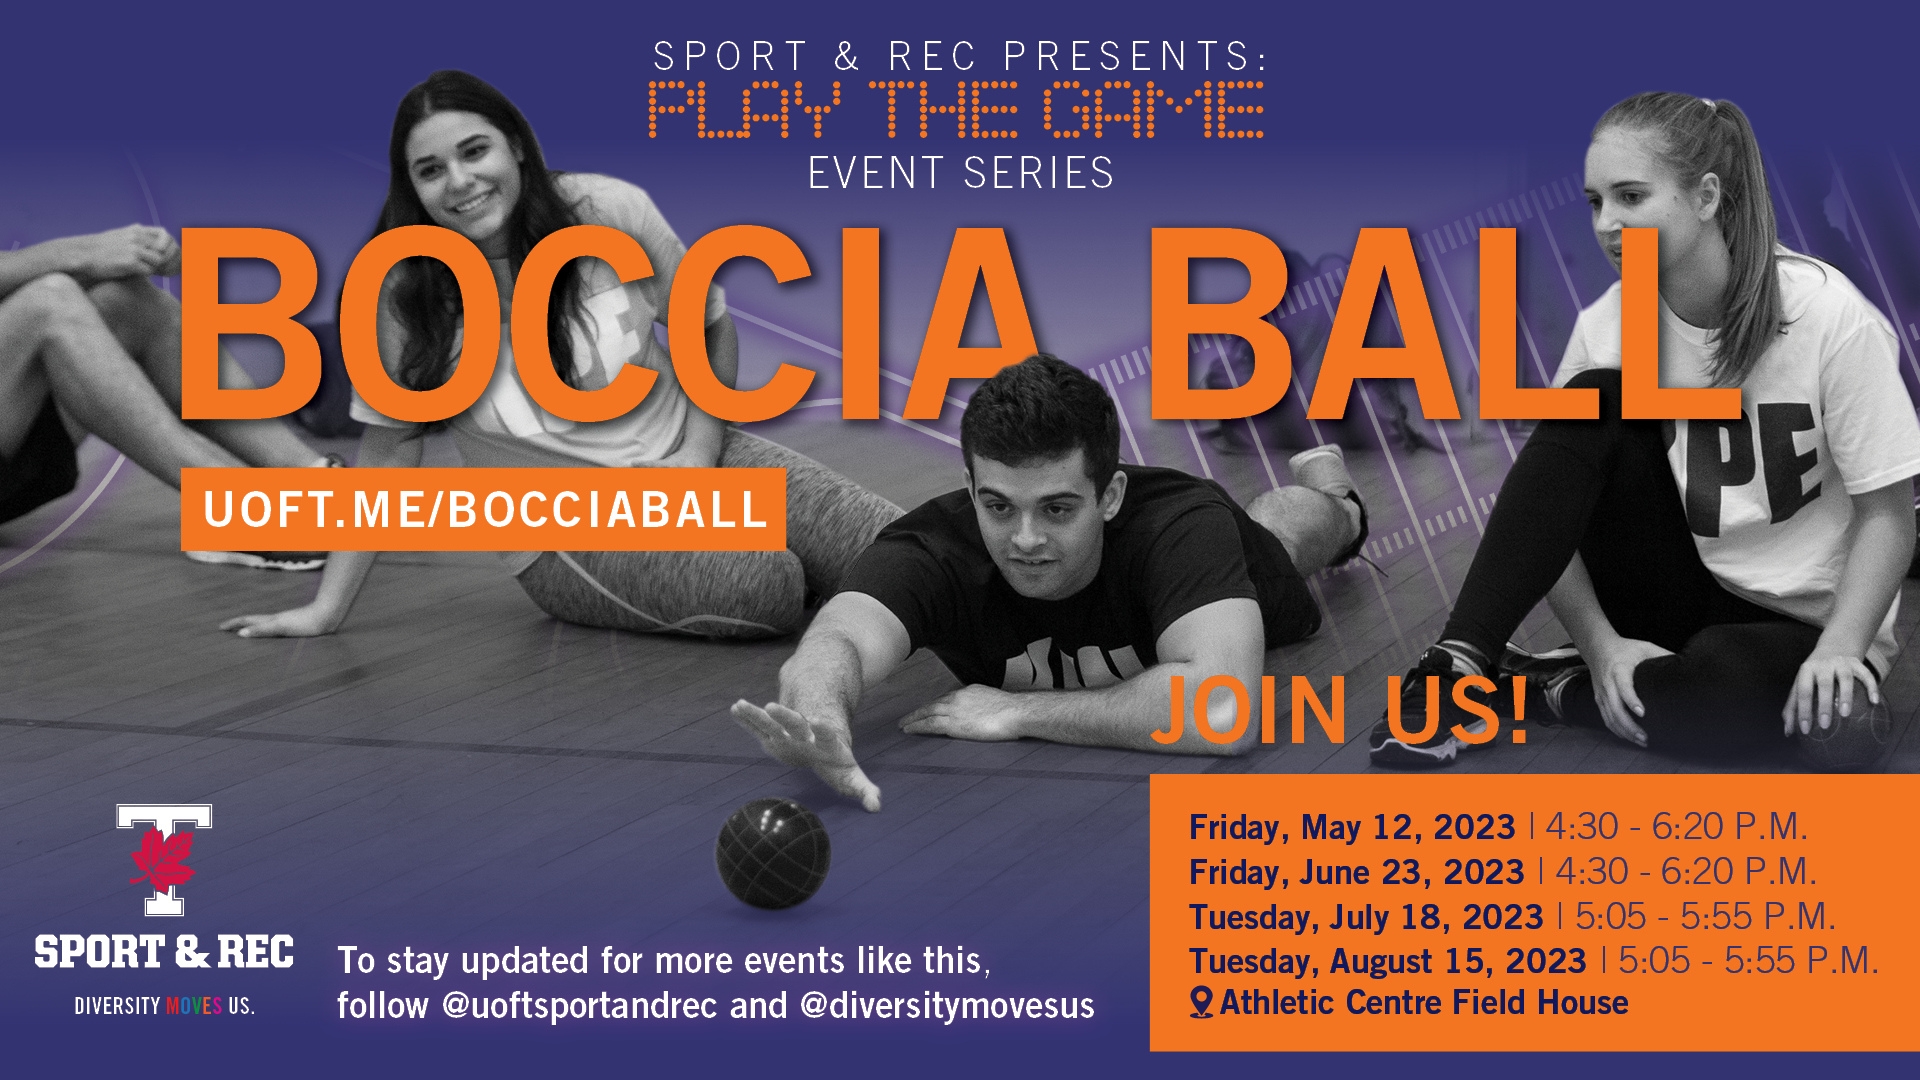 Play the Game - Boccia Ball event - May 12, June 23, July 18 and August 15